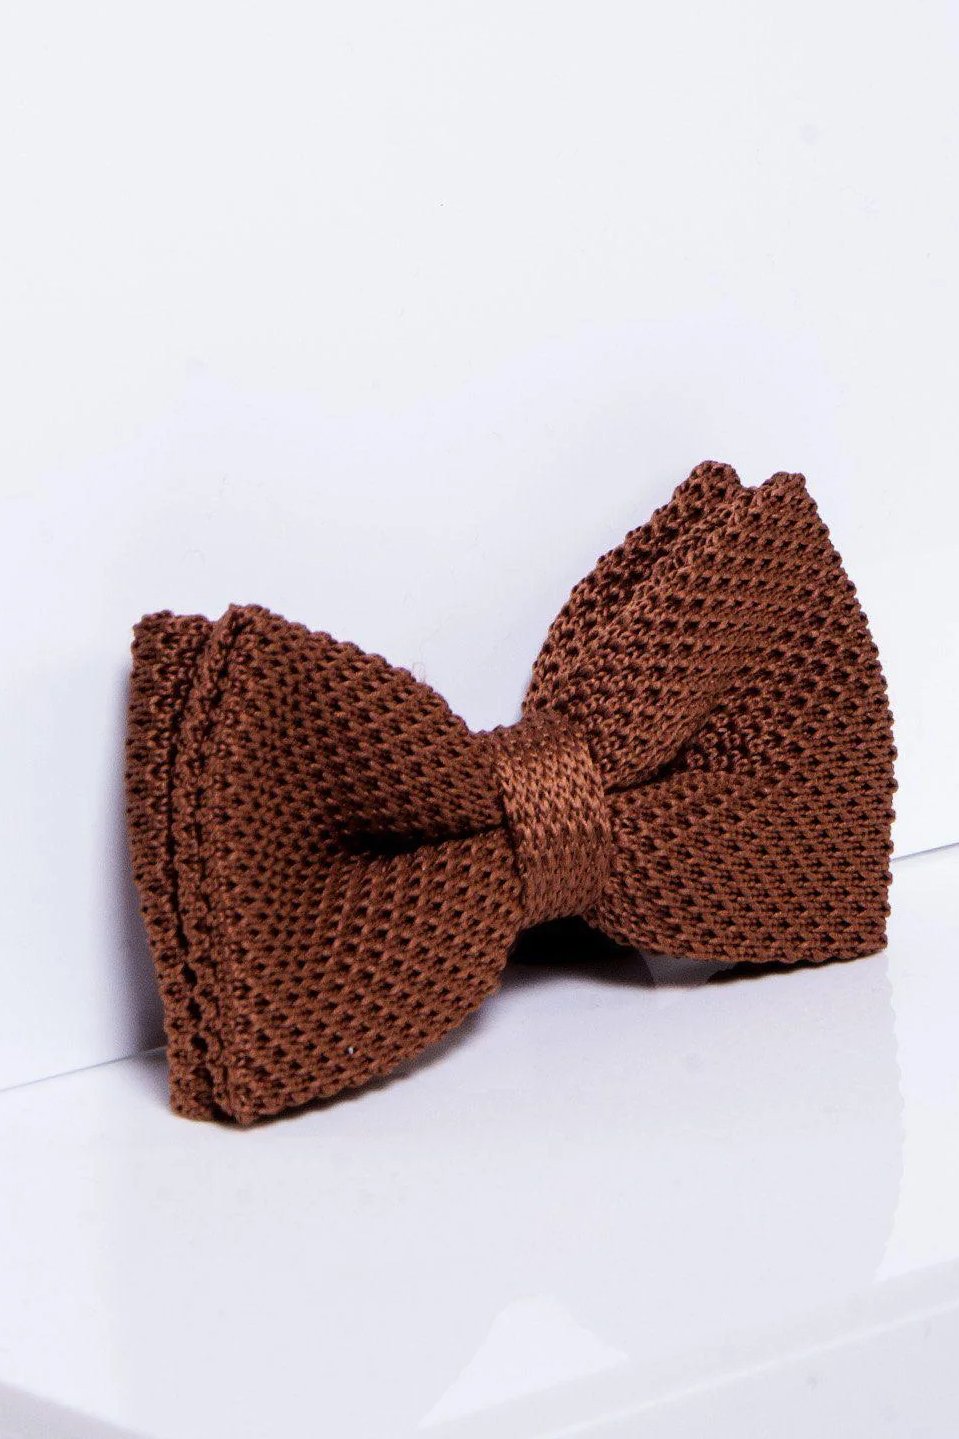 Knitted Rust Men's Bowtie/Dickie bow